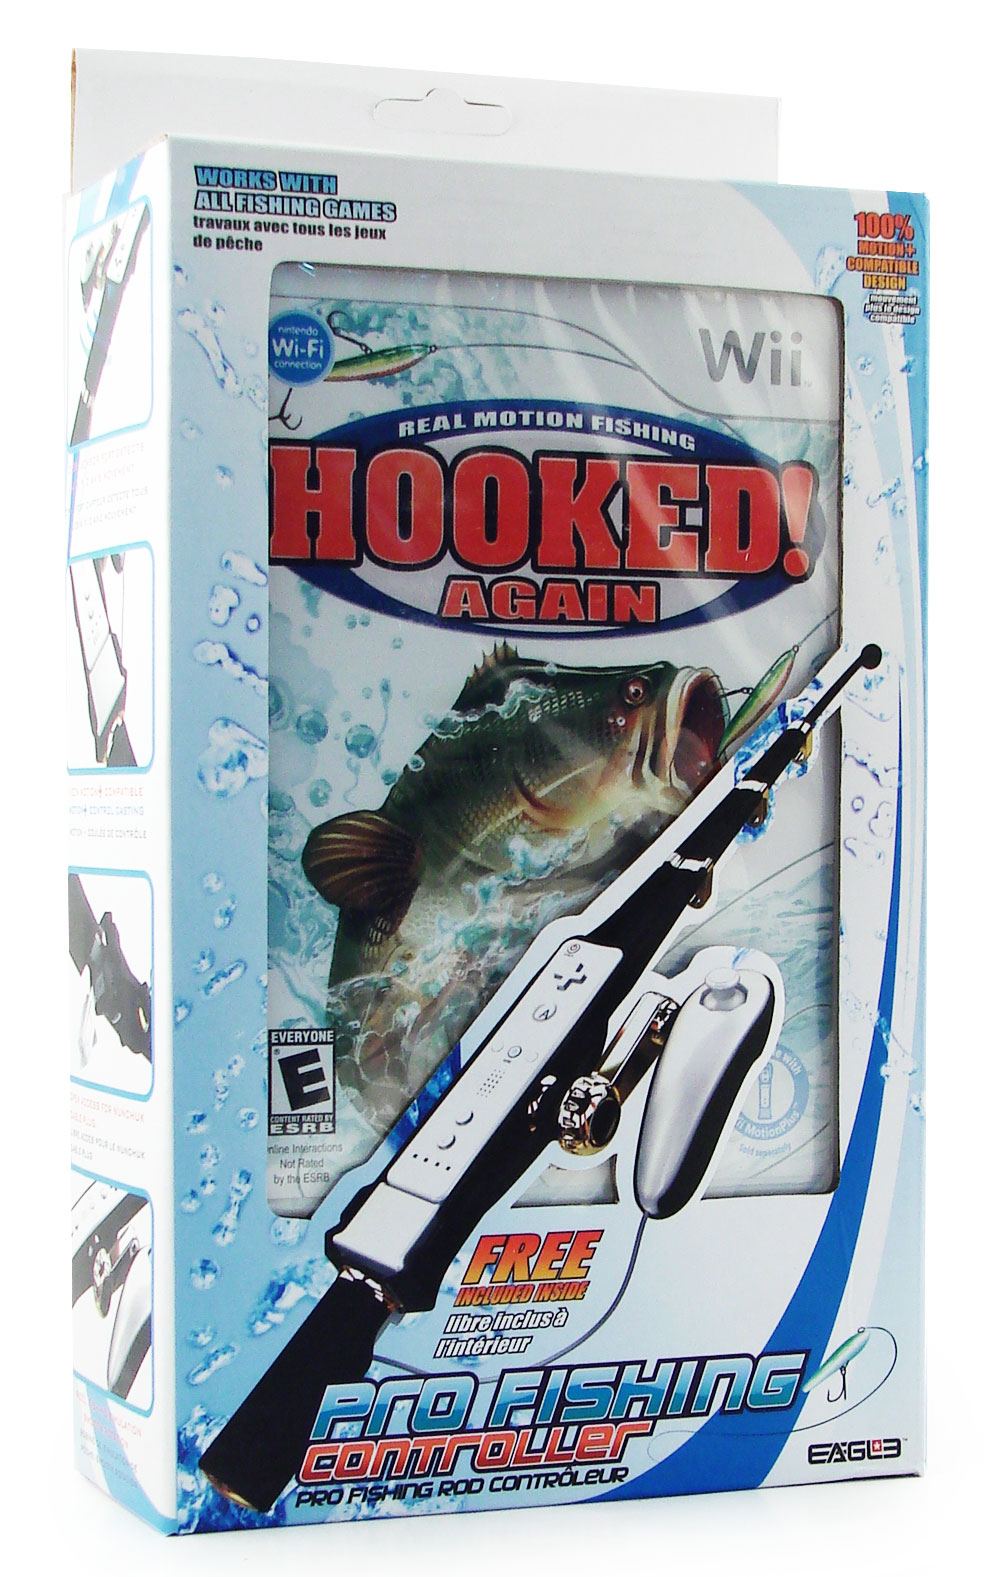 Hooked! Again - Real Motion Fishing